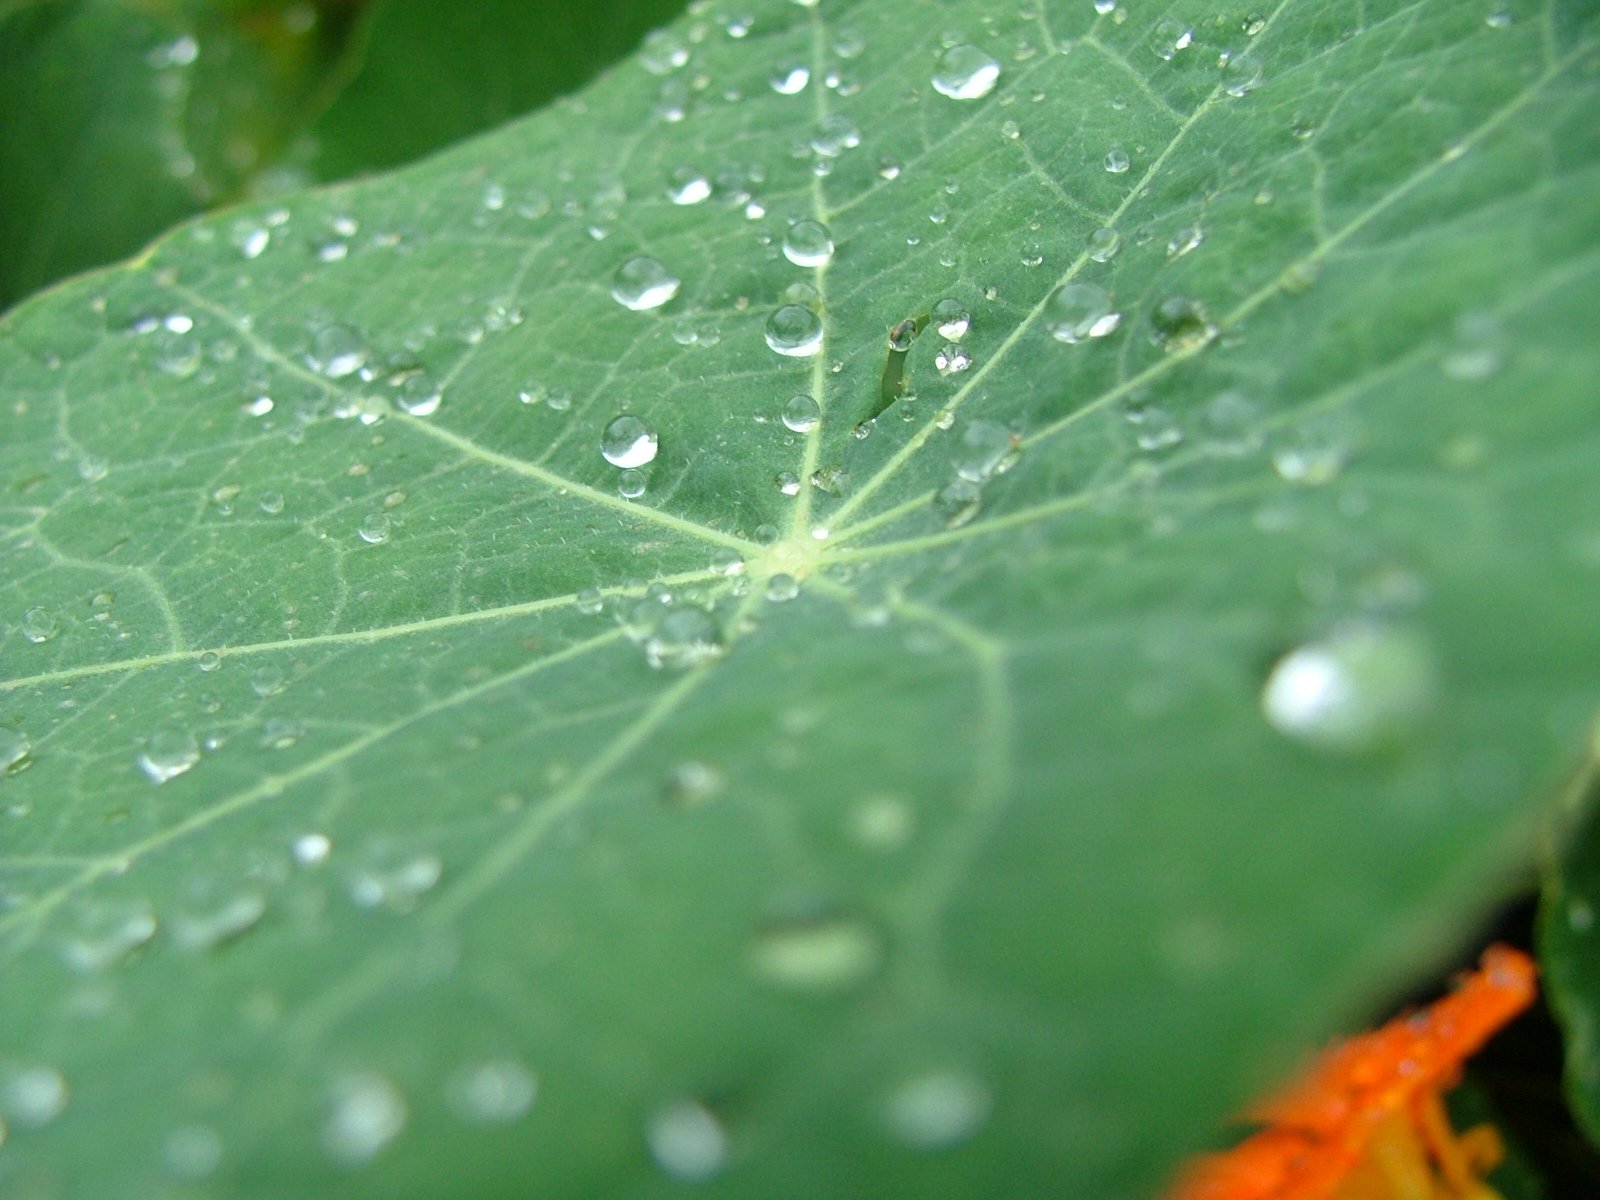 the wet leaf shows lots of water droplets